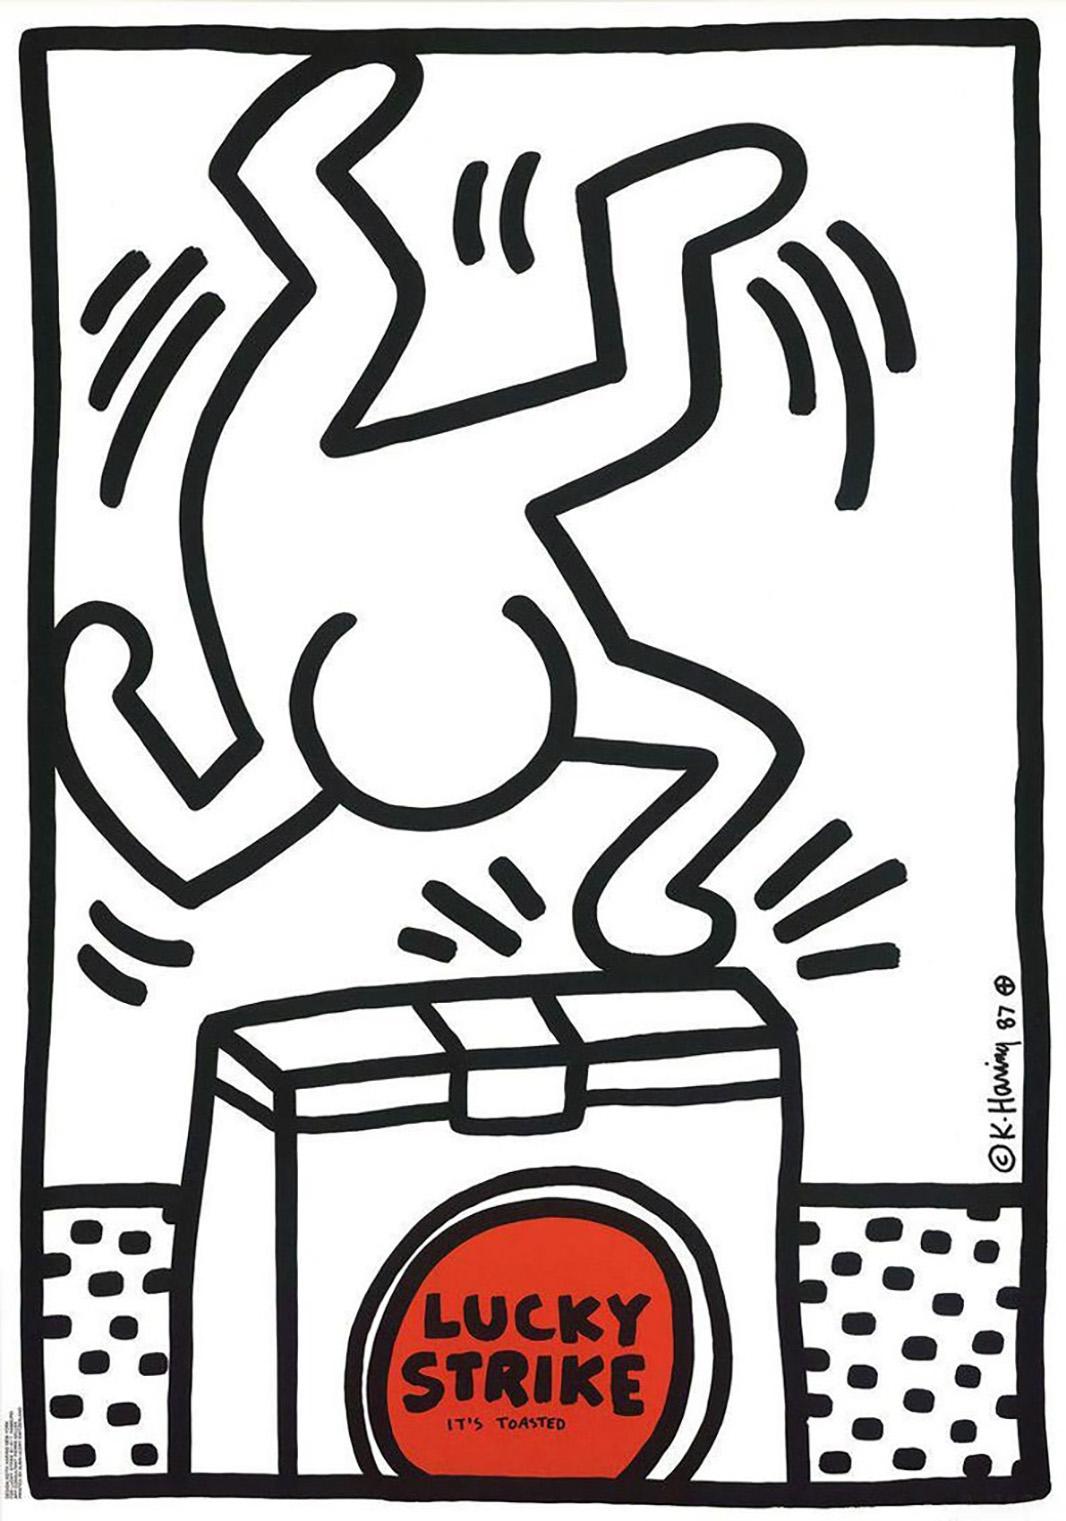 Keith Haring Lucky Strike poster, 1987:
"The advertising posters for Lucky Strike cigarettes reflect the popular Montreux posters from 1983. According to the imprint, they were commissioned by Lucky Strike Switzerland, arranged by the art consultant